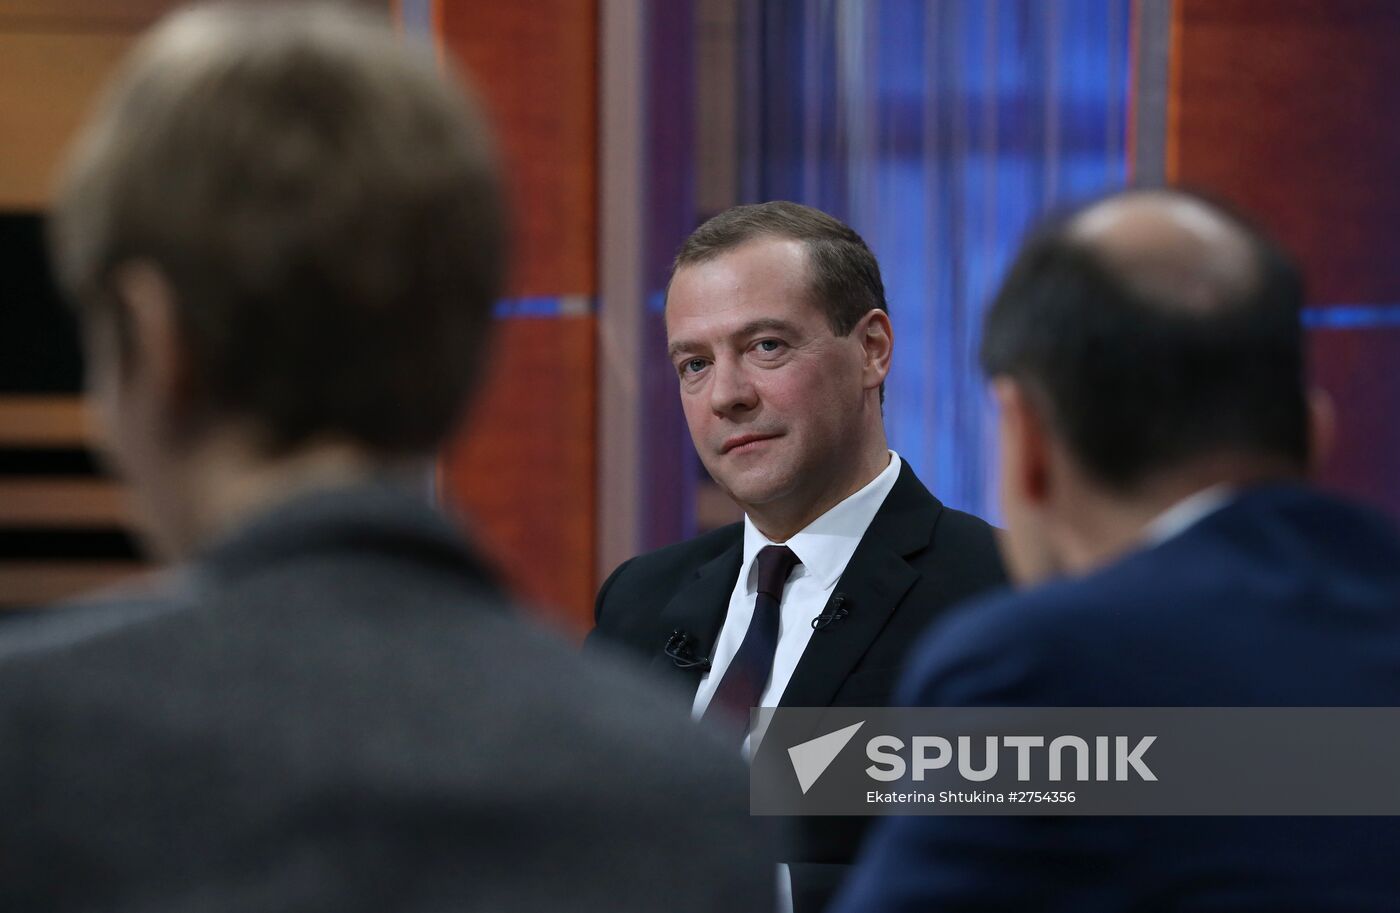 Prime Minister Dmitry Medvedev's interview with five television channels